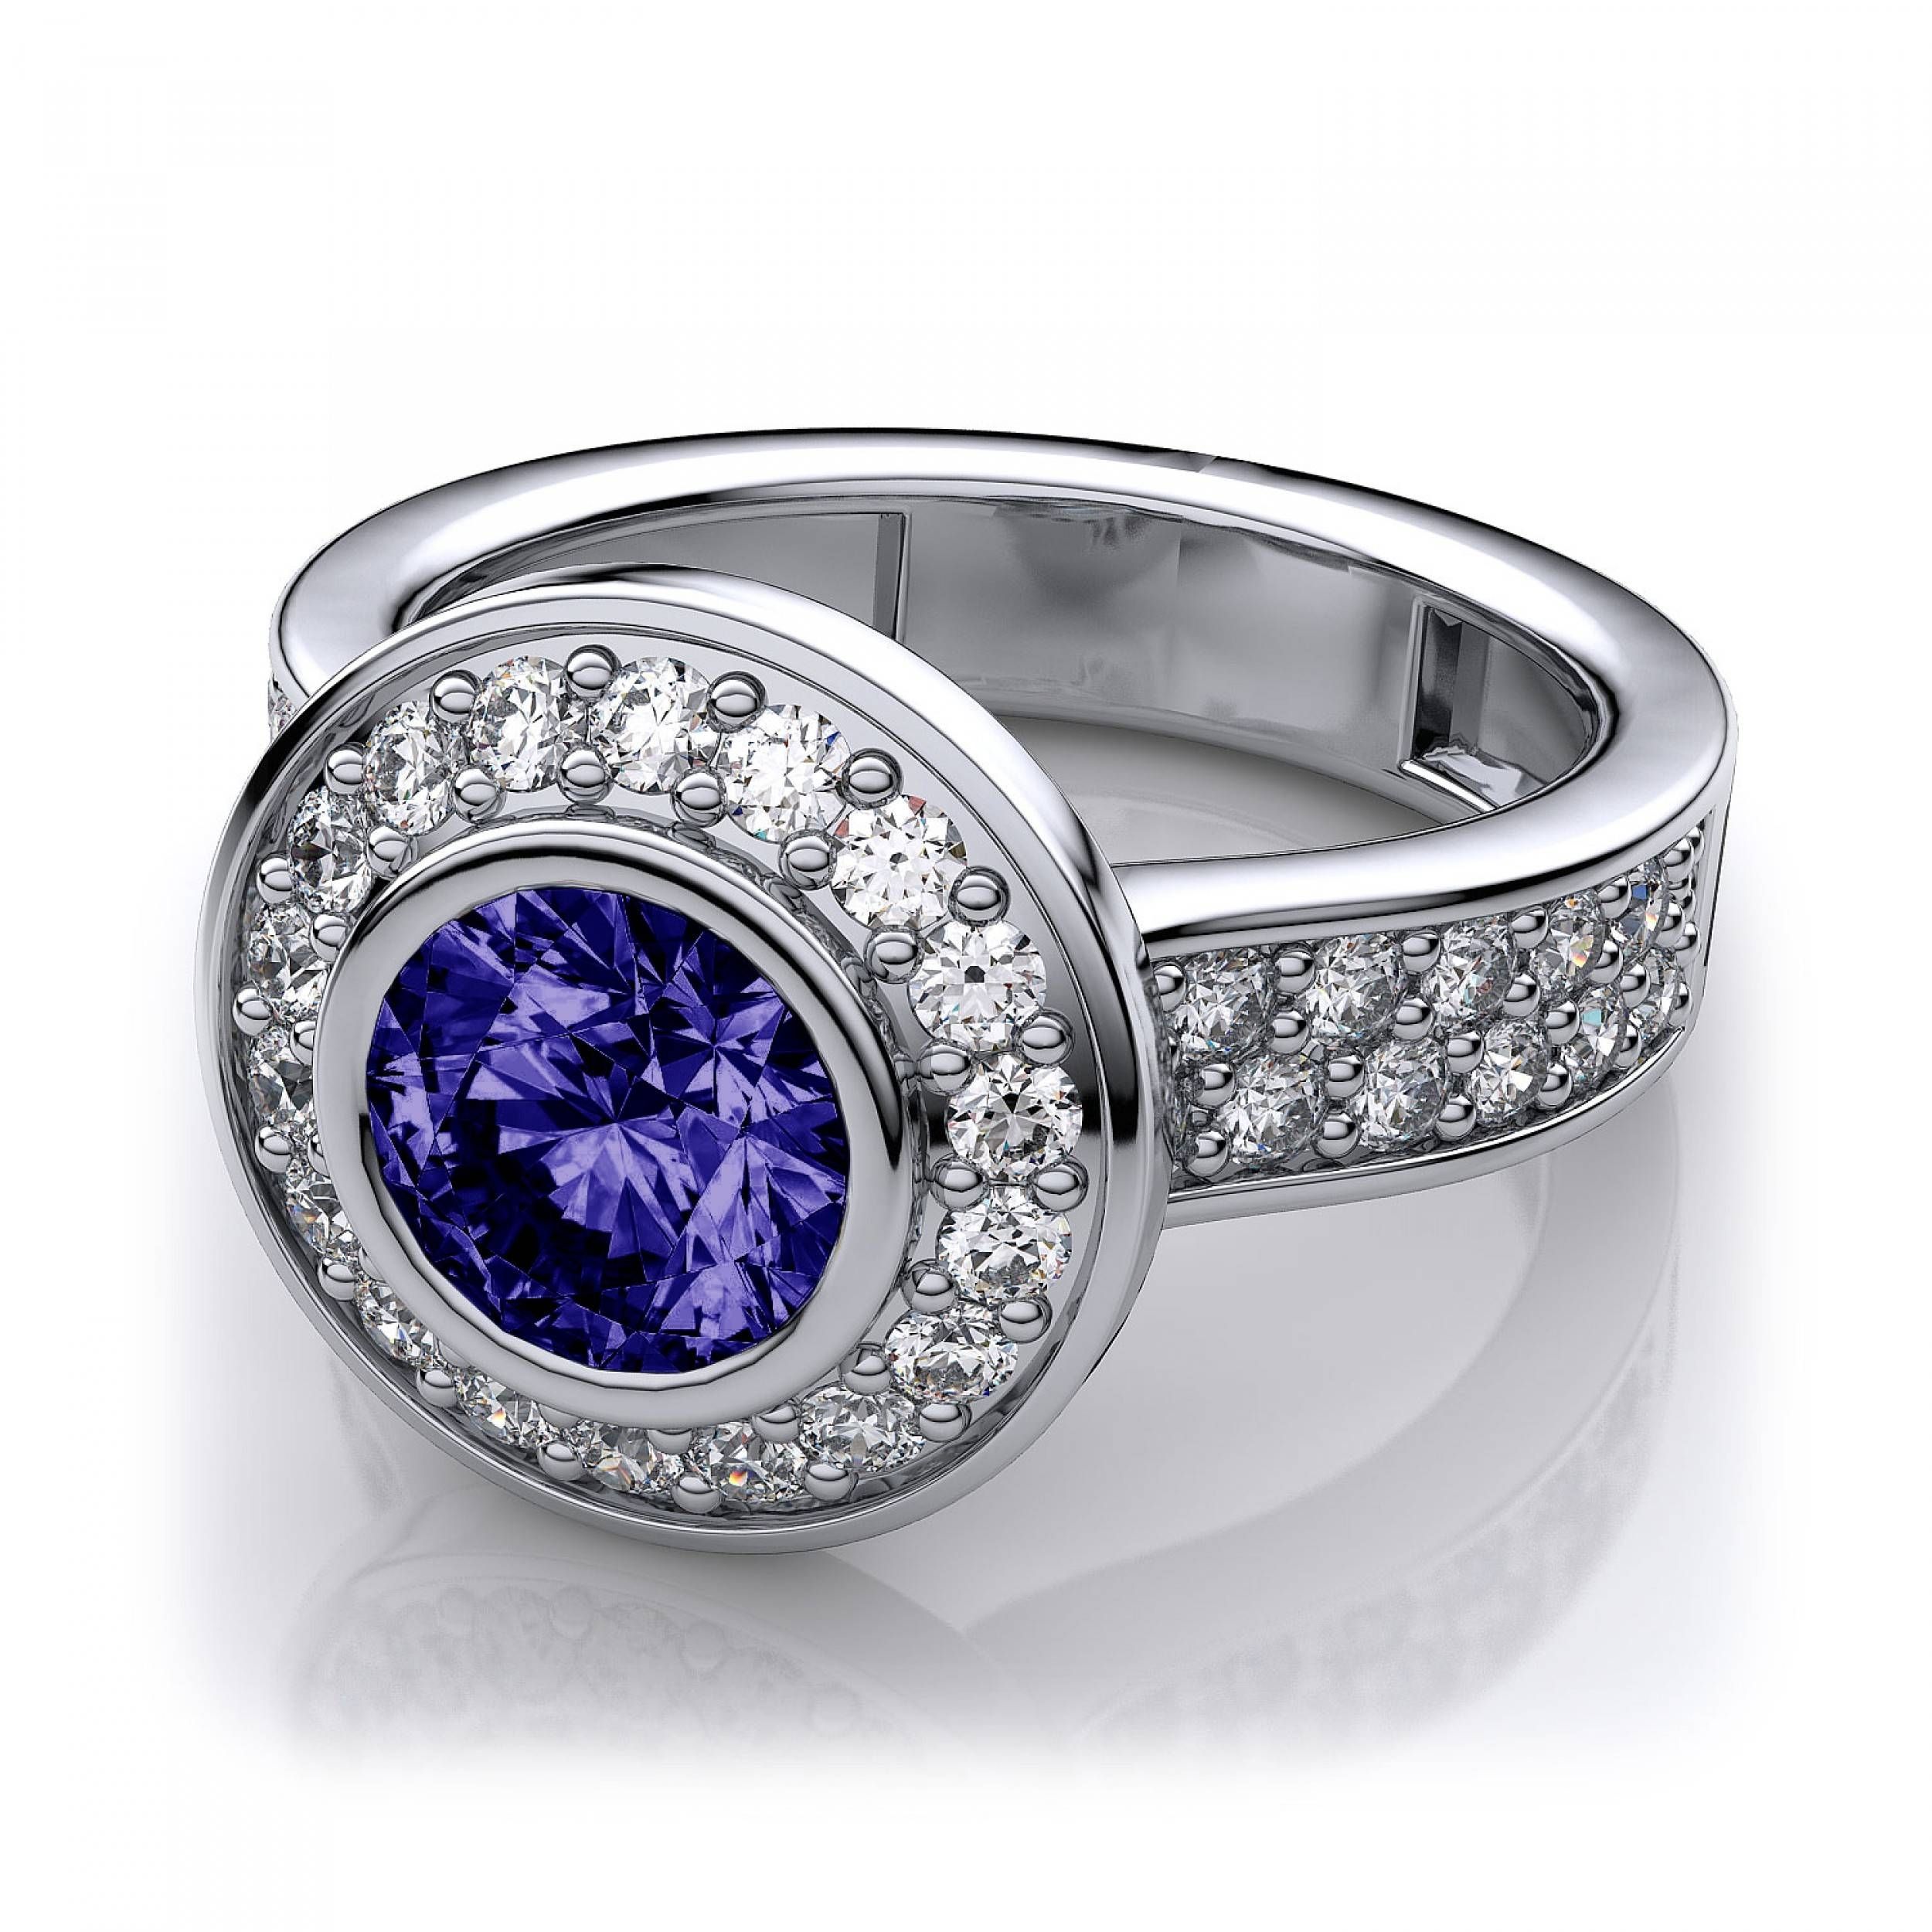 Profile Tanzanite Halo And Bezel Set Diamond Ring In 14k White Gold Intended For White Gold Tanzanite Engagement Rings (View 4 of 15)